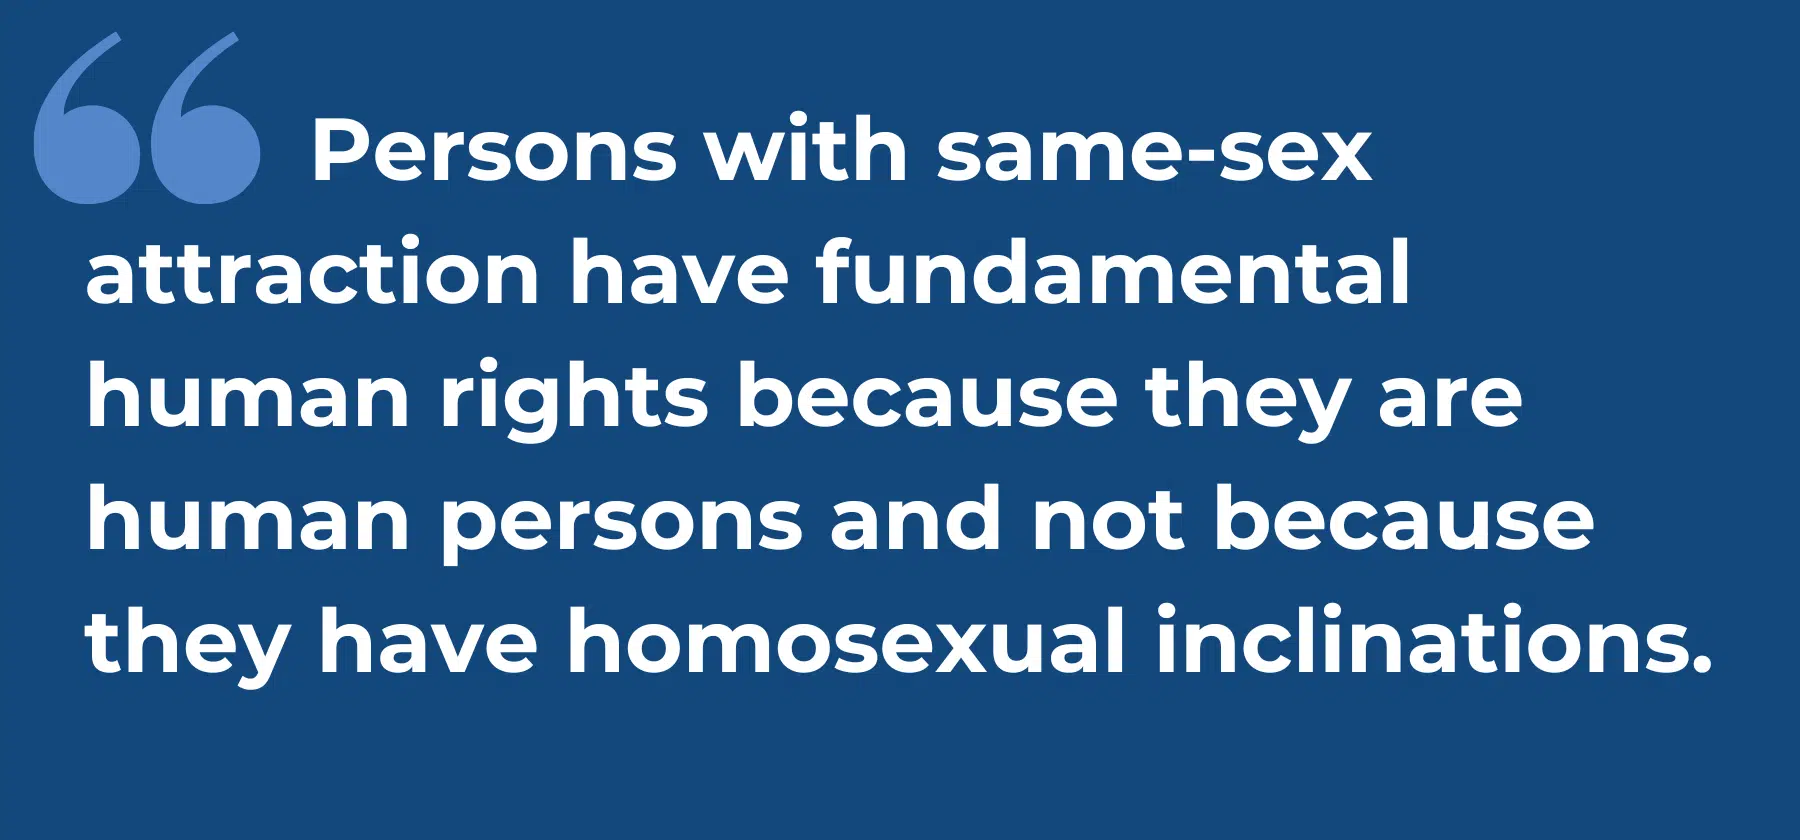 people with SSA have rights because they are persons, not because they are homosexual